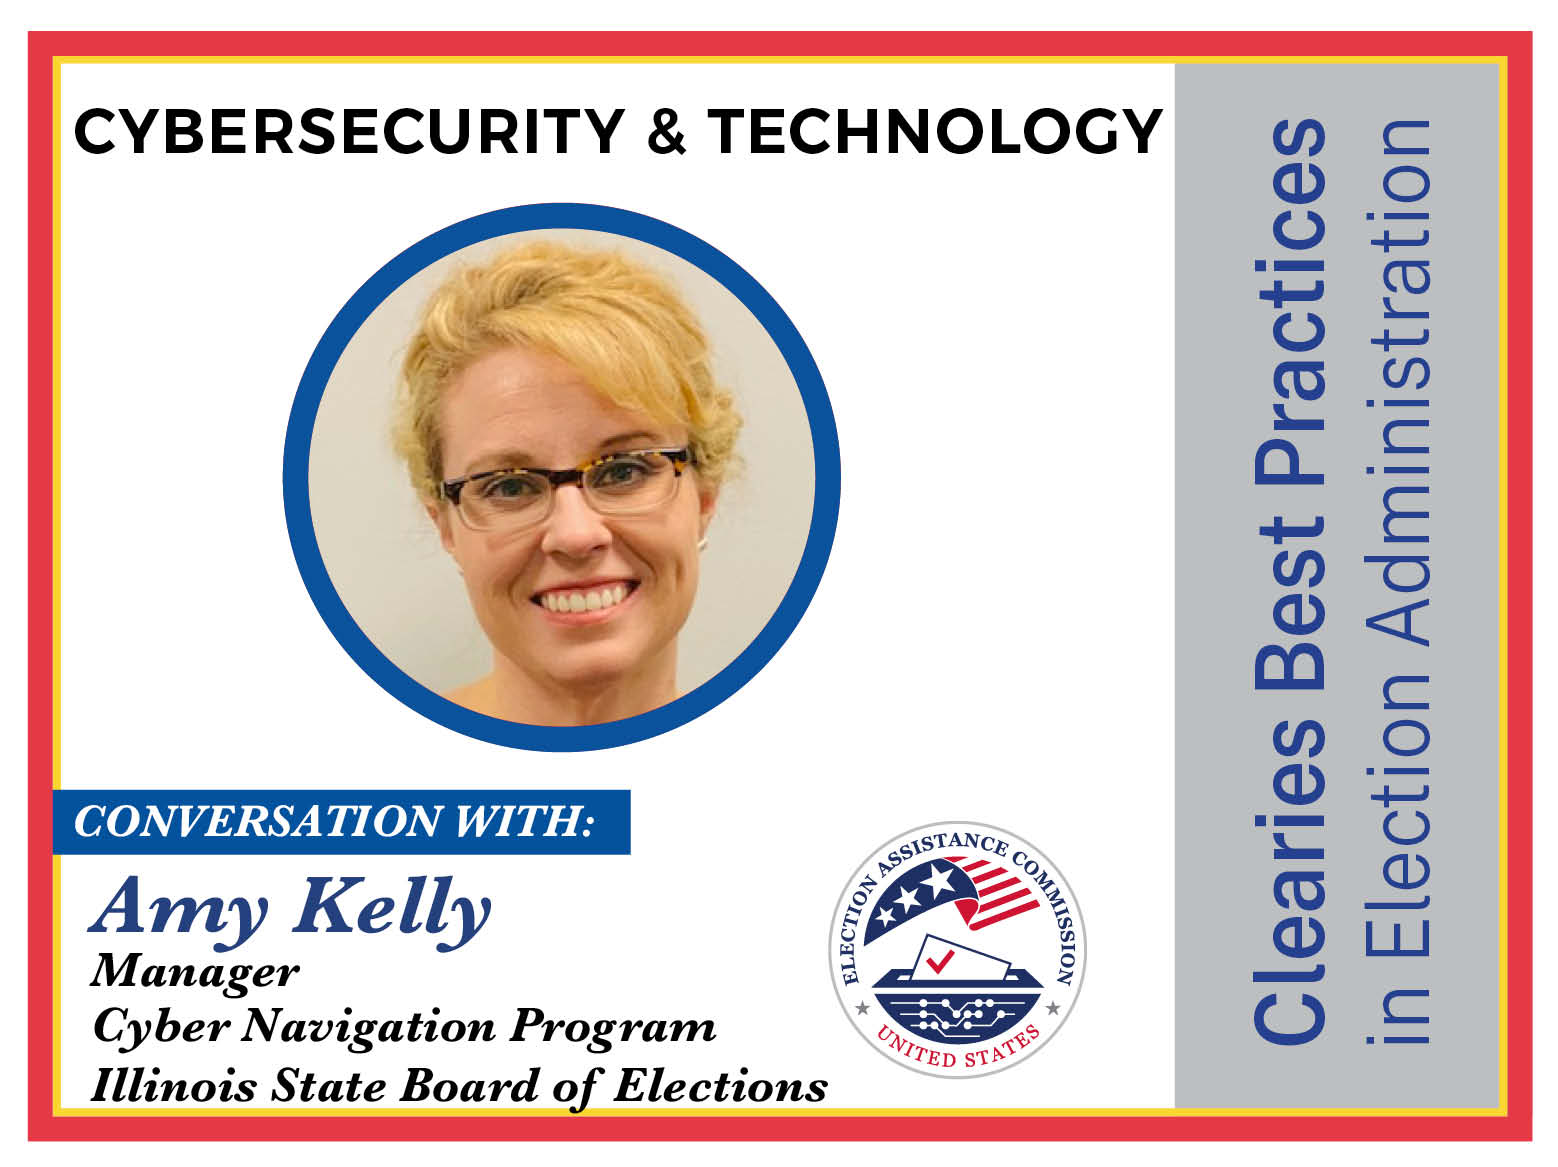 Clearies Best Practices conversation with Amy Kelly Cyber Navigation Program Manager for Illinois State Board of Elections